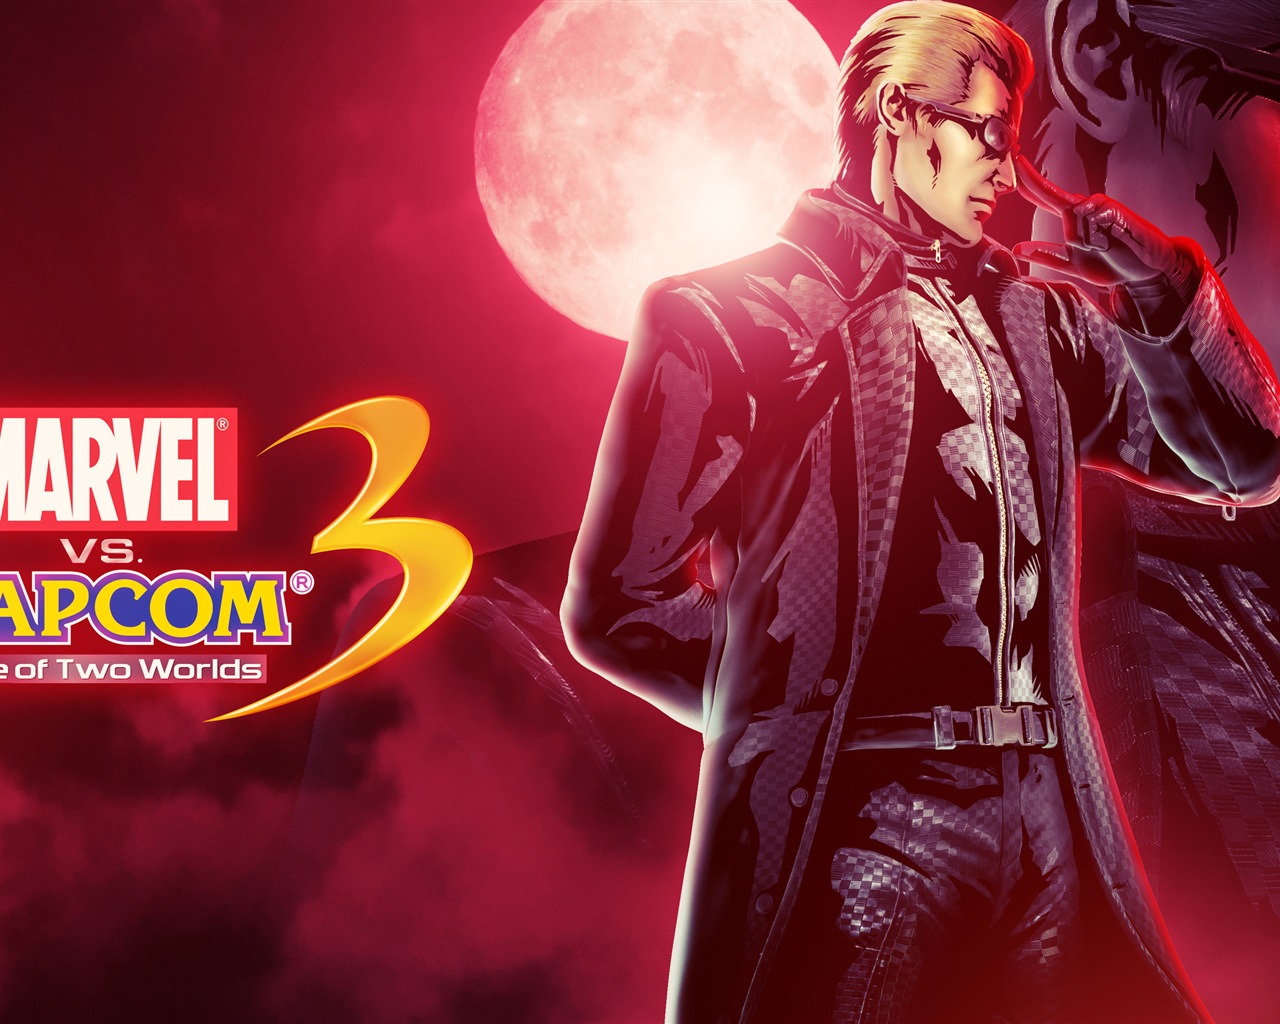 Marvel VS. Capcom 3: Fate of Two Worlds HD game wallpapers #9 - 1280x1024